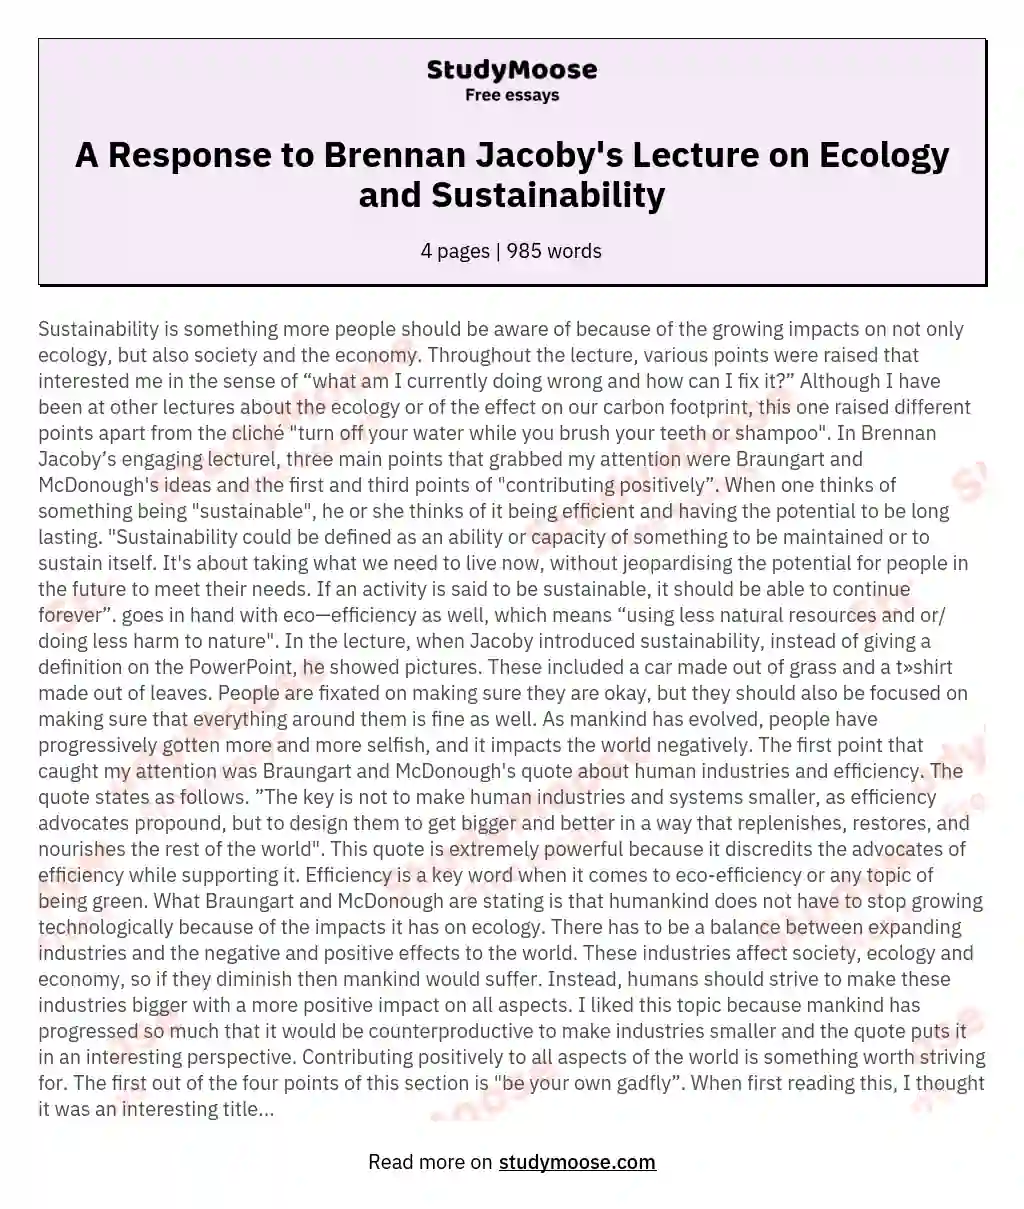 A Response to Brennan Jacoby's Lecture on Ecology and Sustainability essay